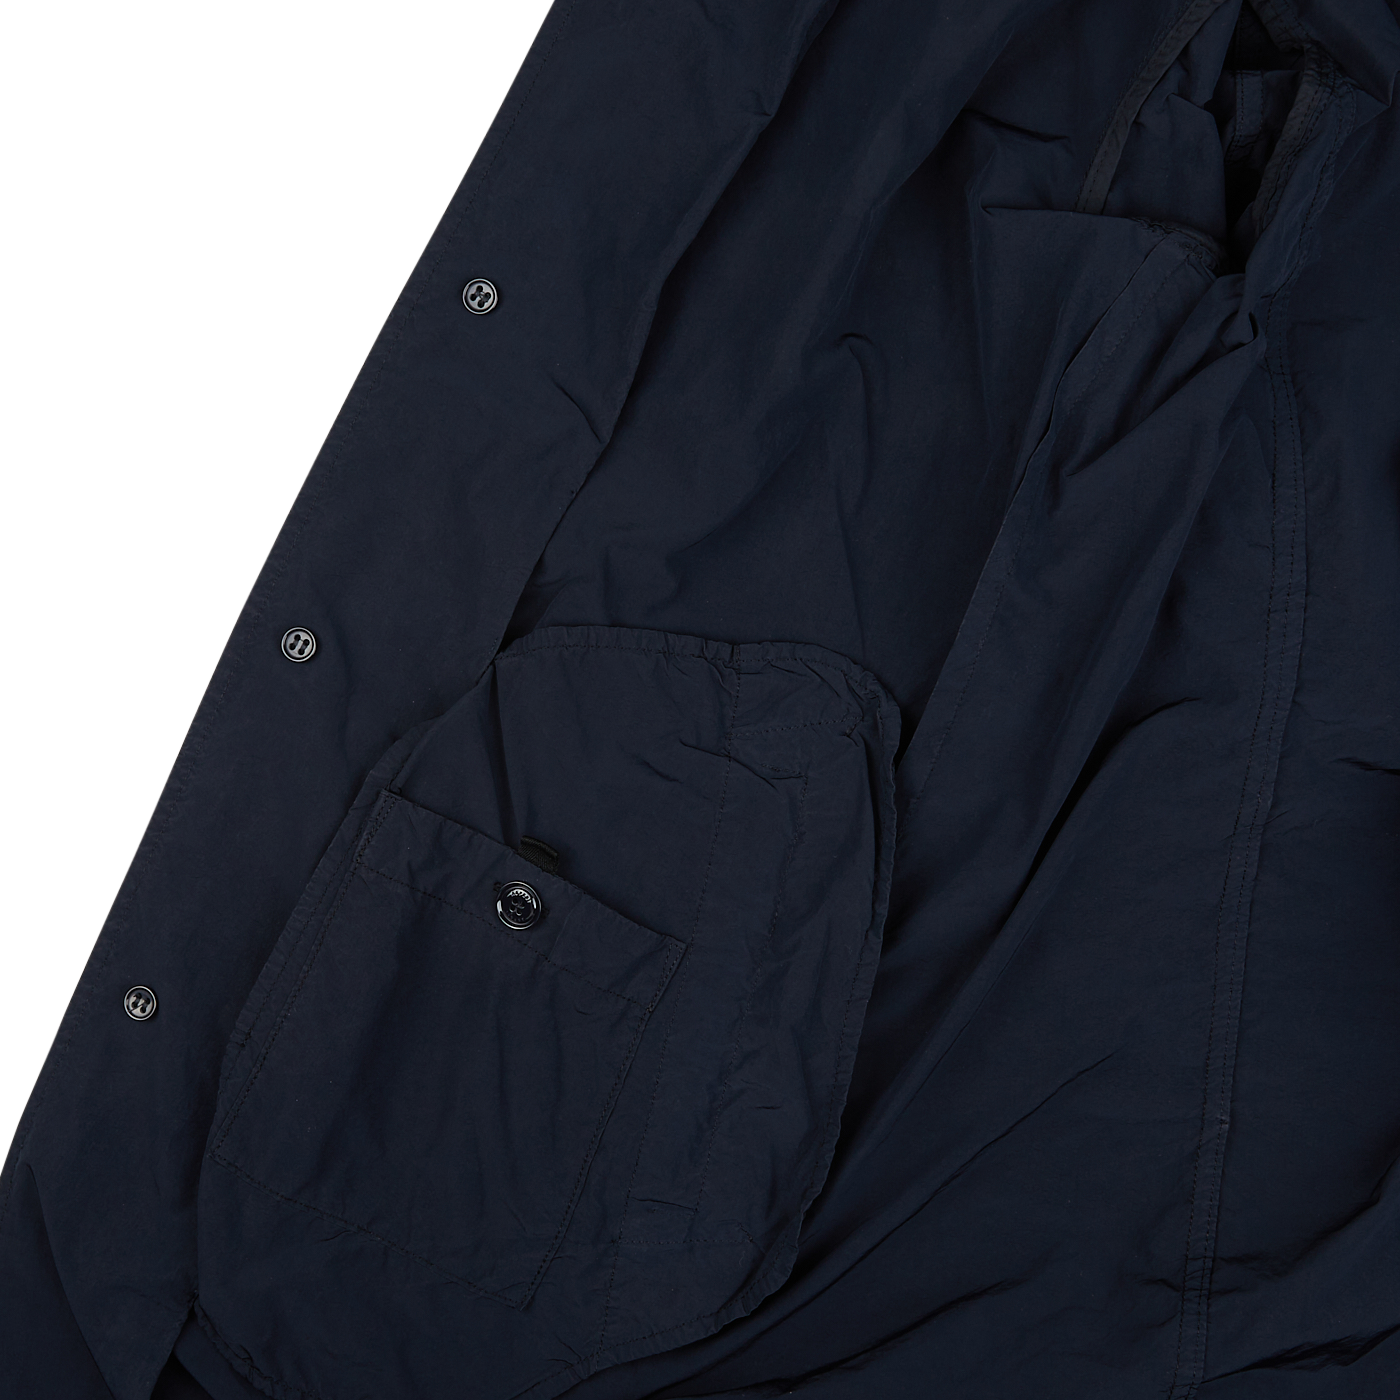 A close up of an Aspesi Navy Blue Micro Nylon Limone Coat on a white surface.